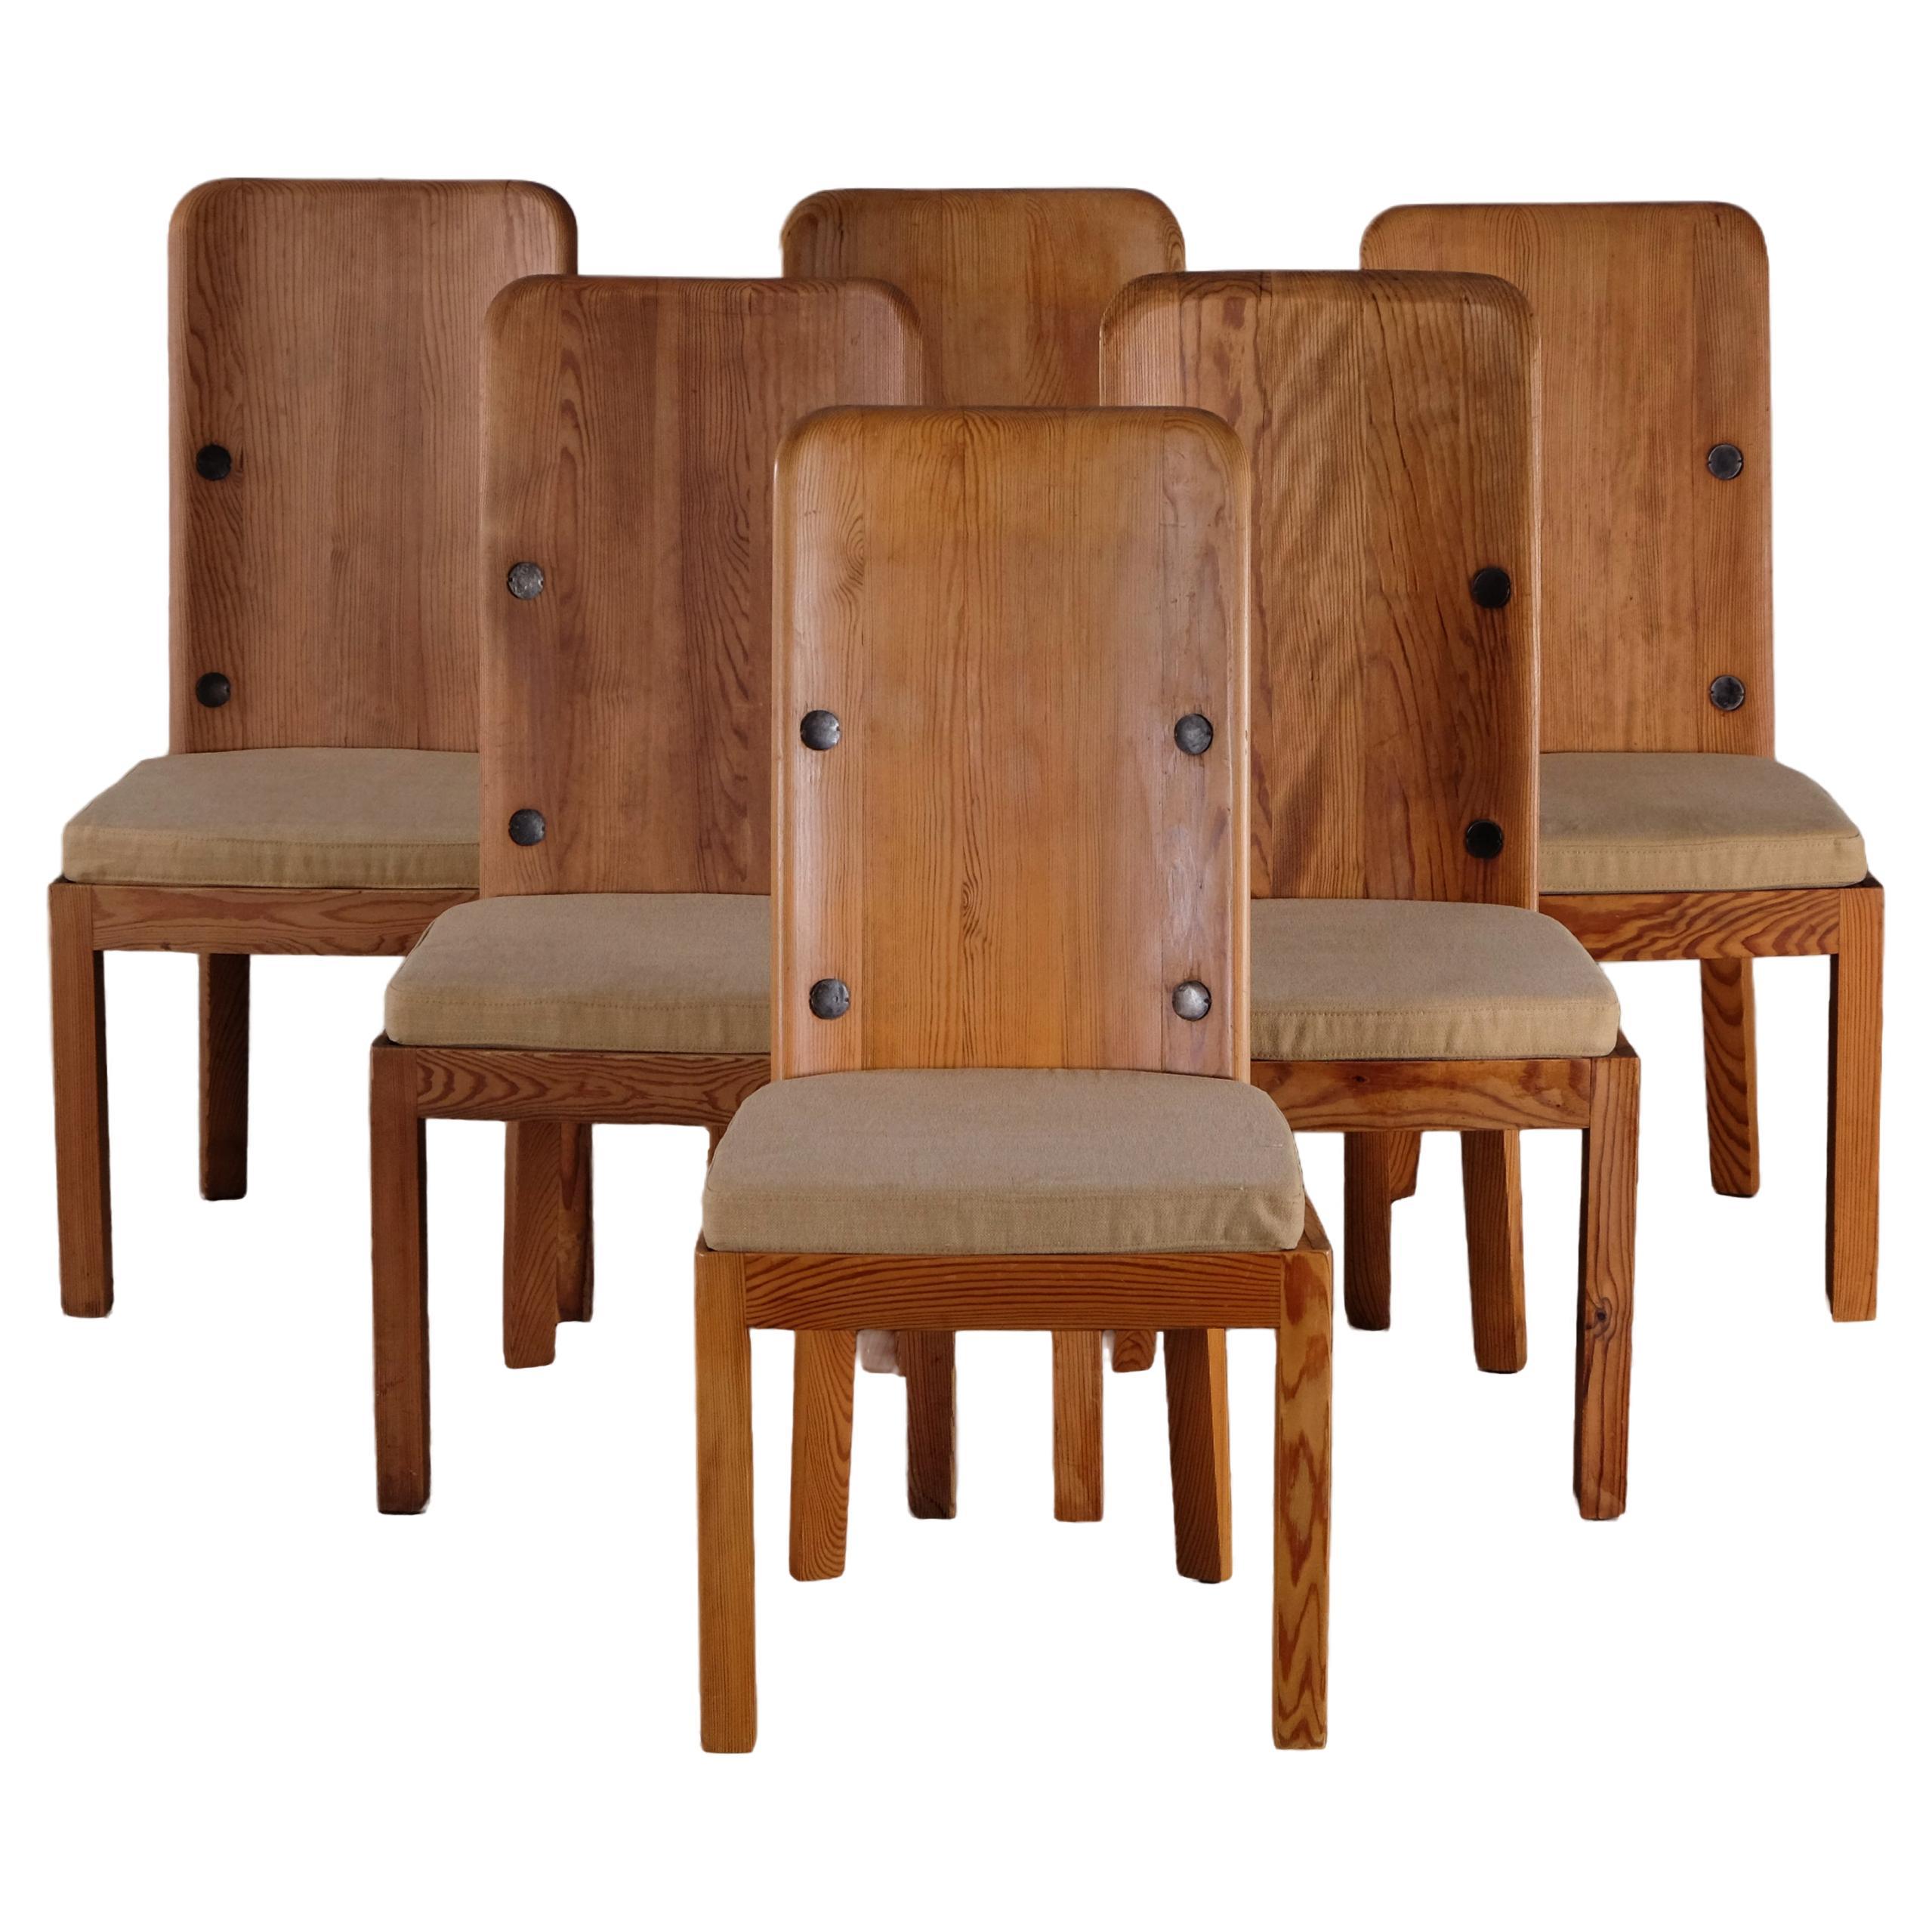 Set of 6 "Lovö" Chairs by Axel Einar-Hjorth, 1930s